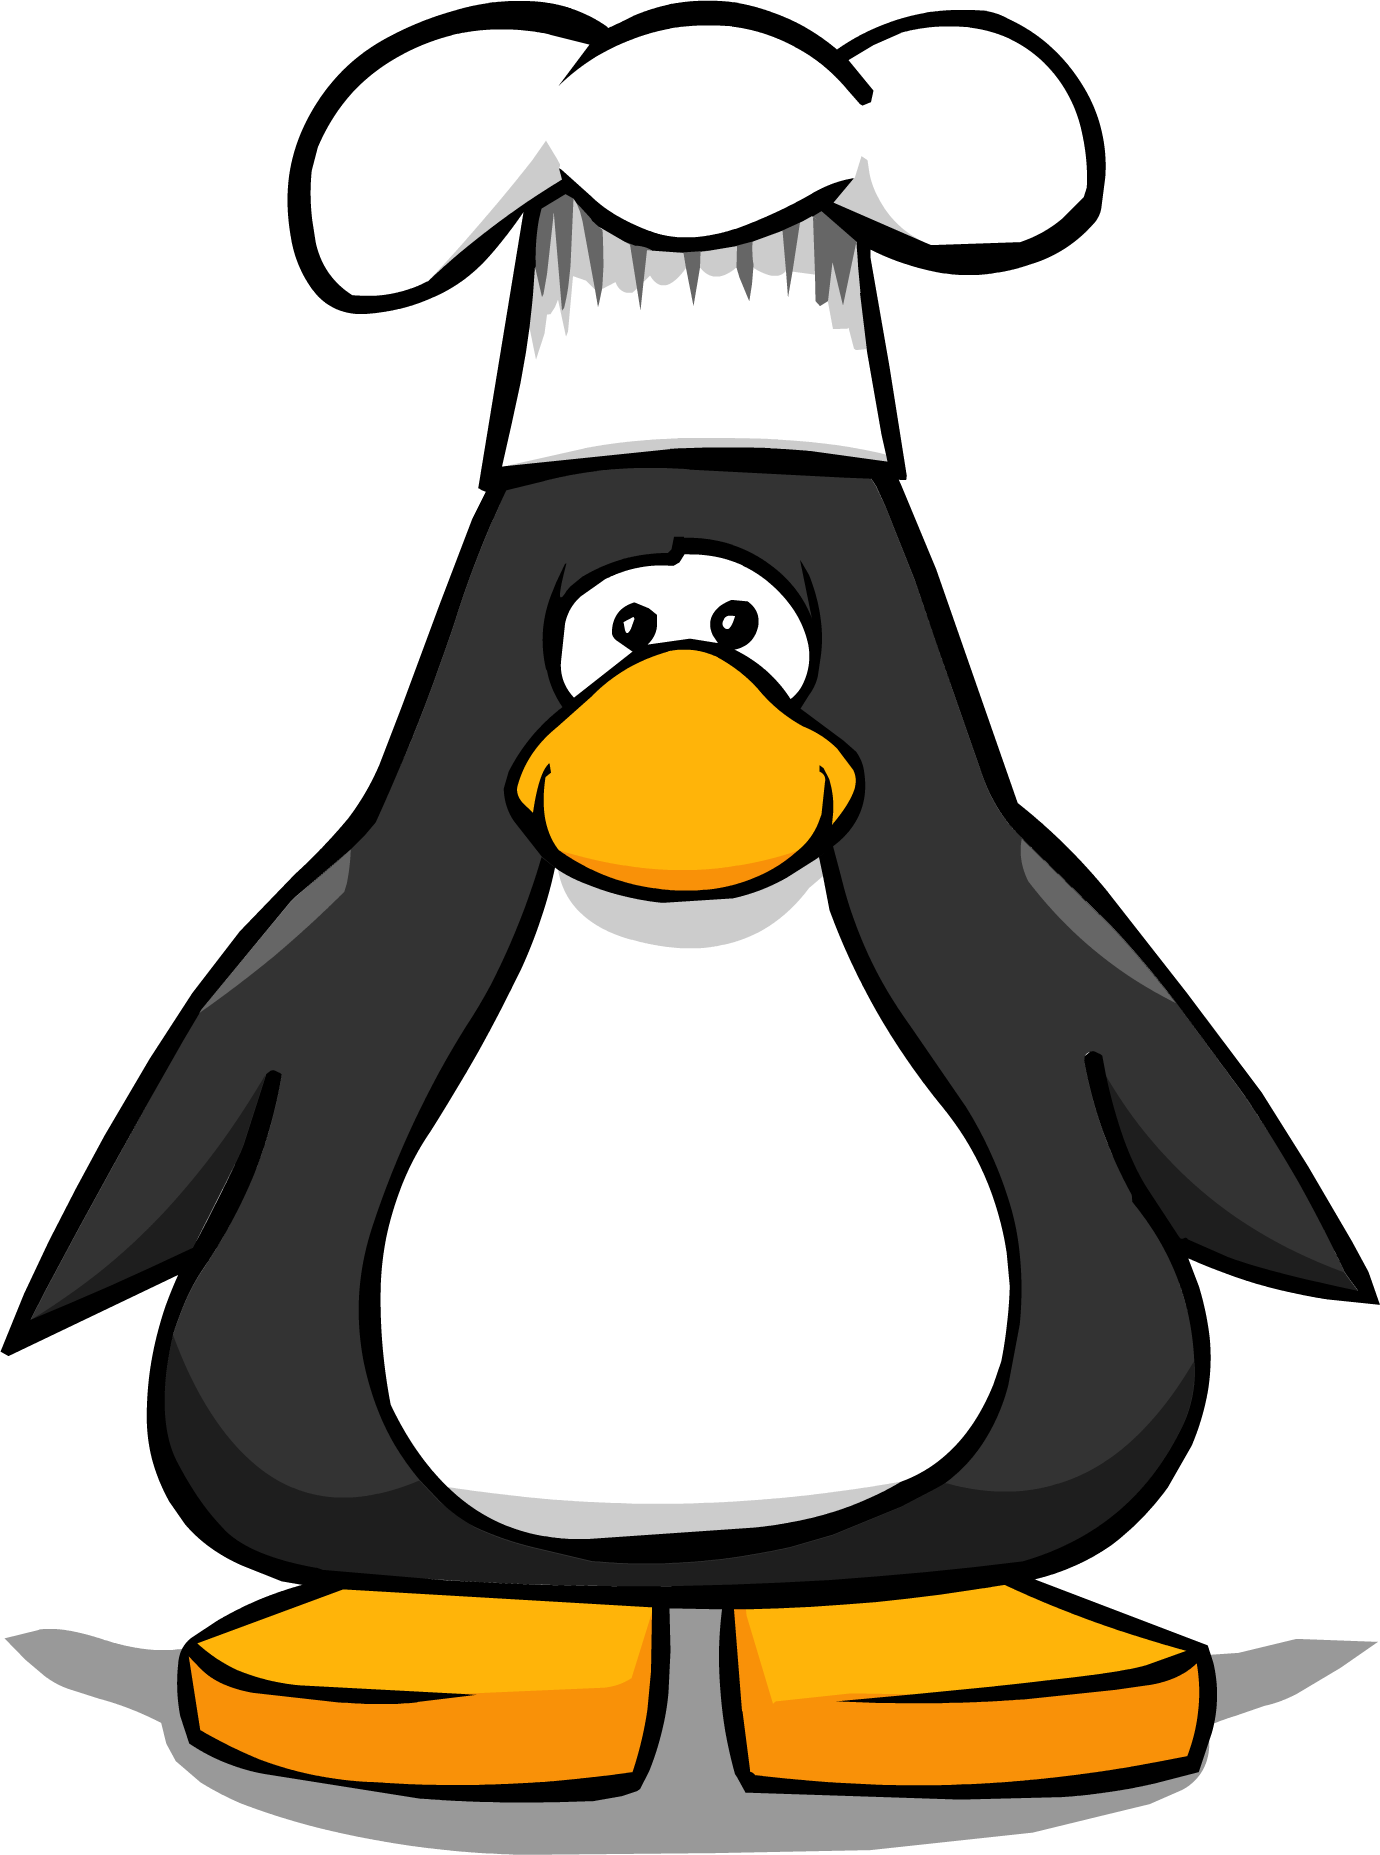 Chef Hat From A Player Card - Club Penguin Boa (1380x1855)